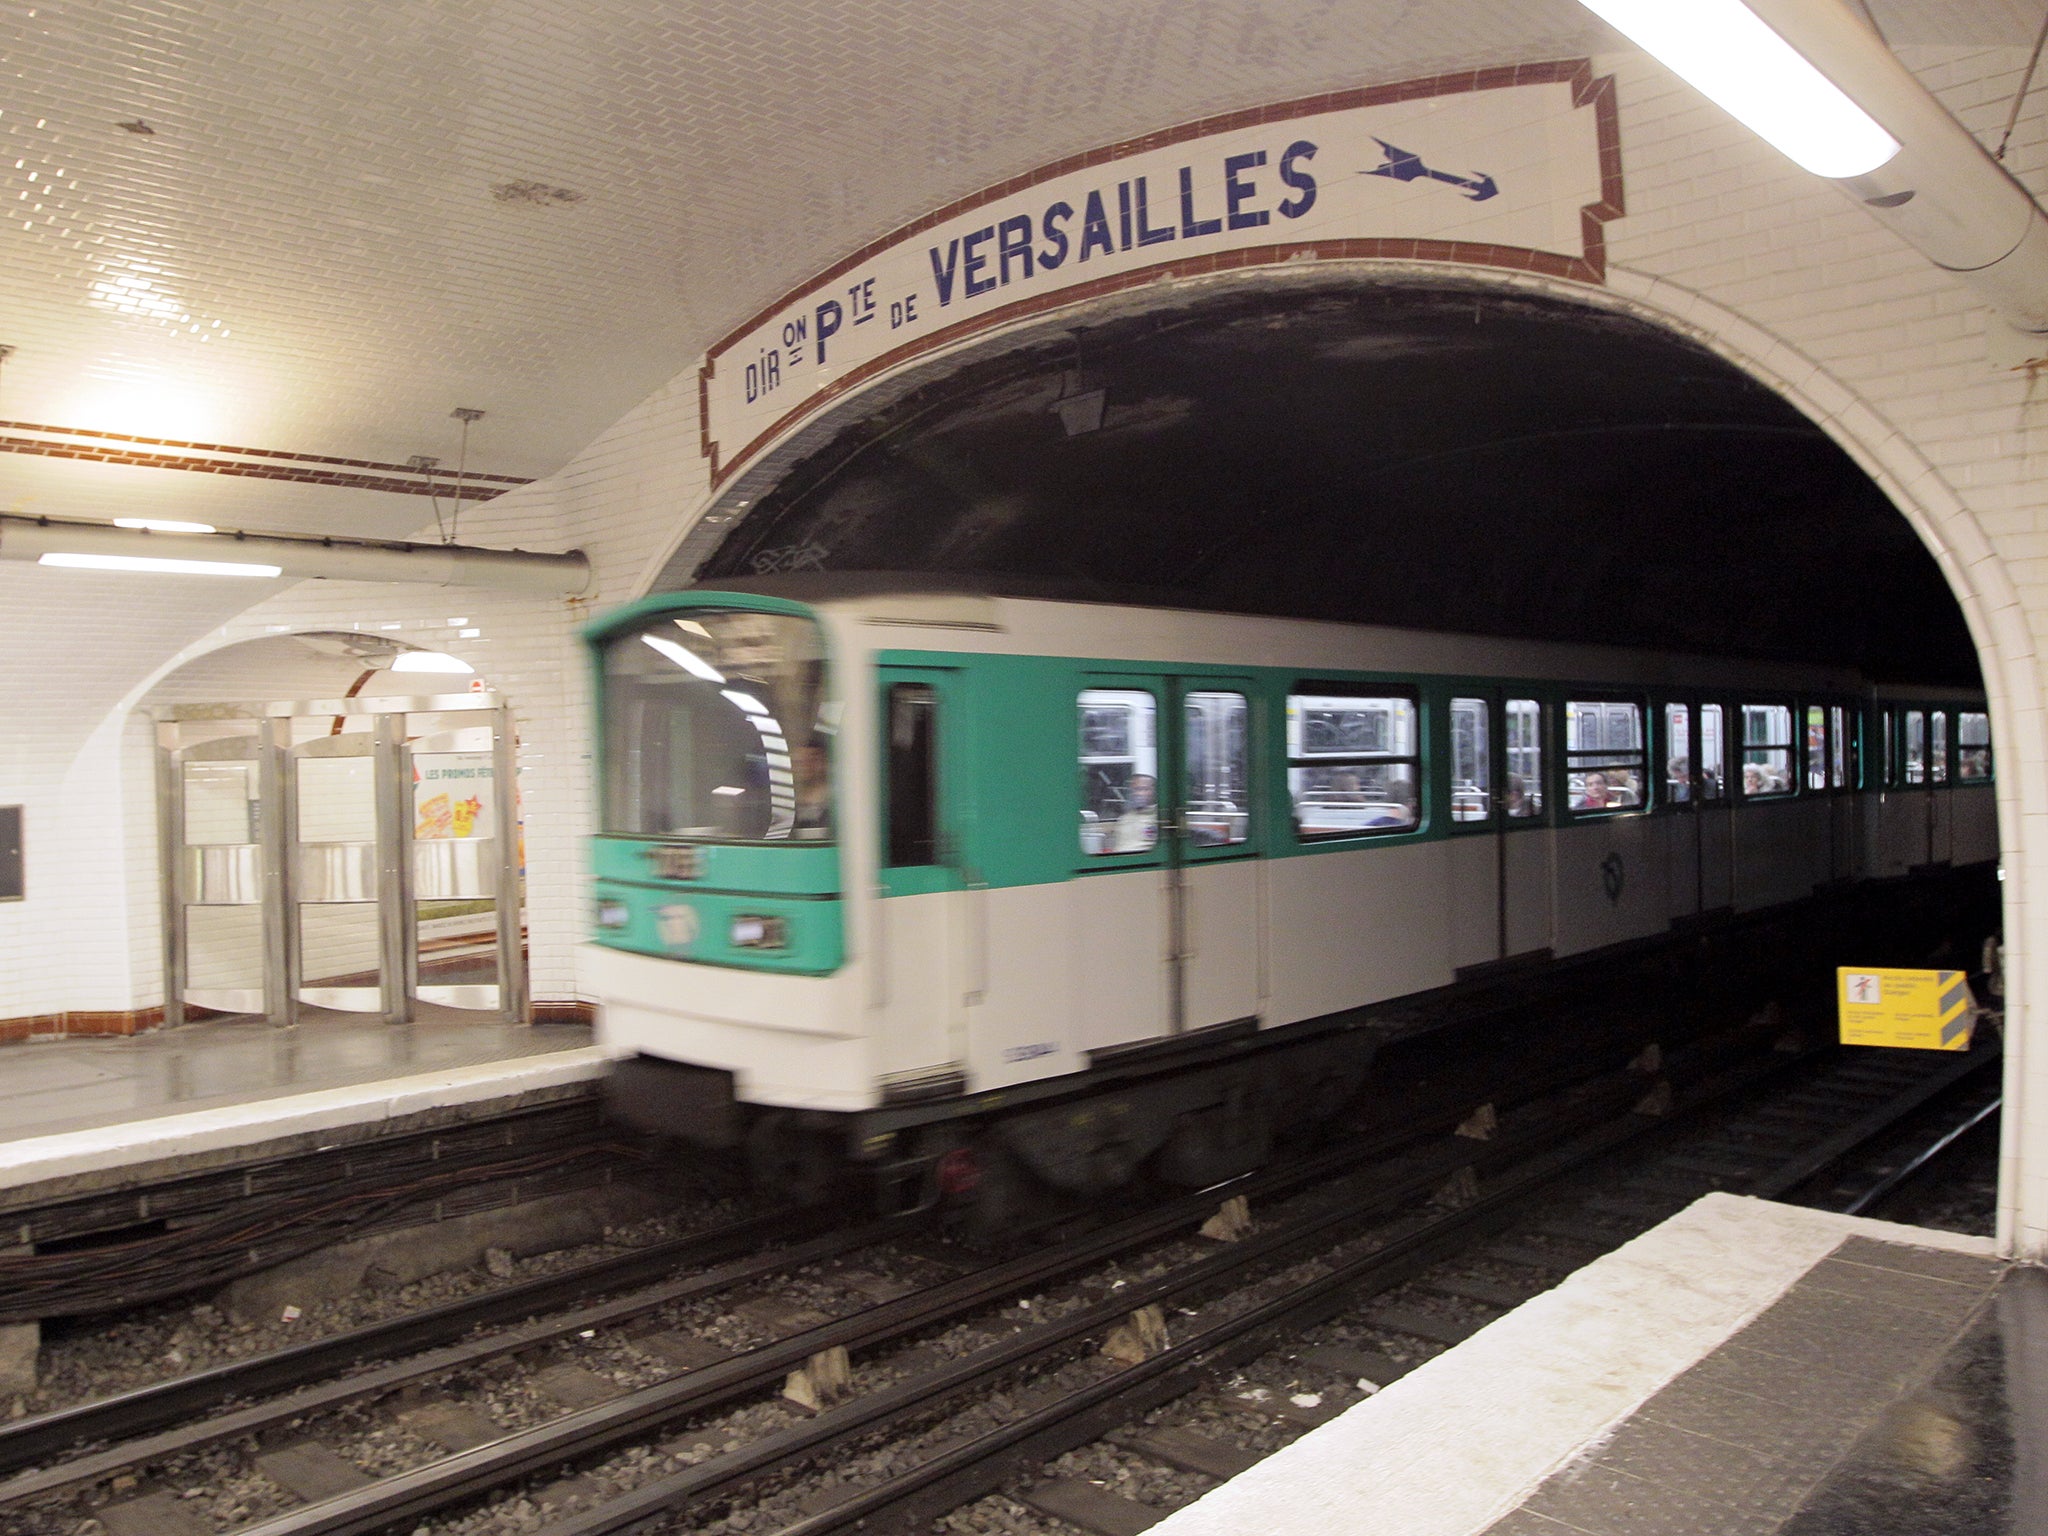 Iraq received word of a plot by Isis to attack the Paris Metro system and the New York subway